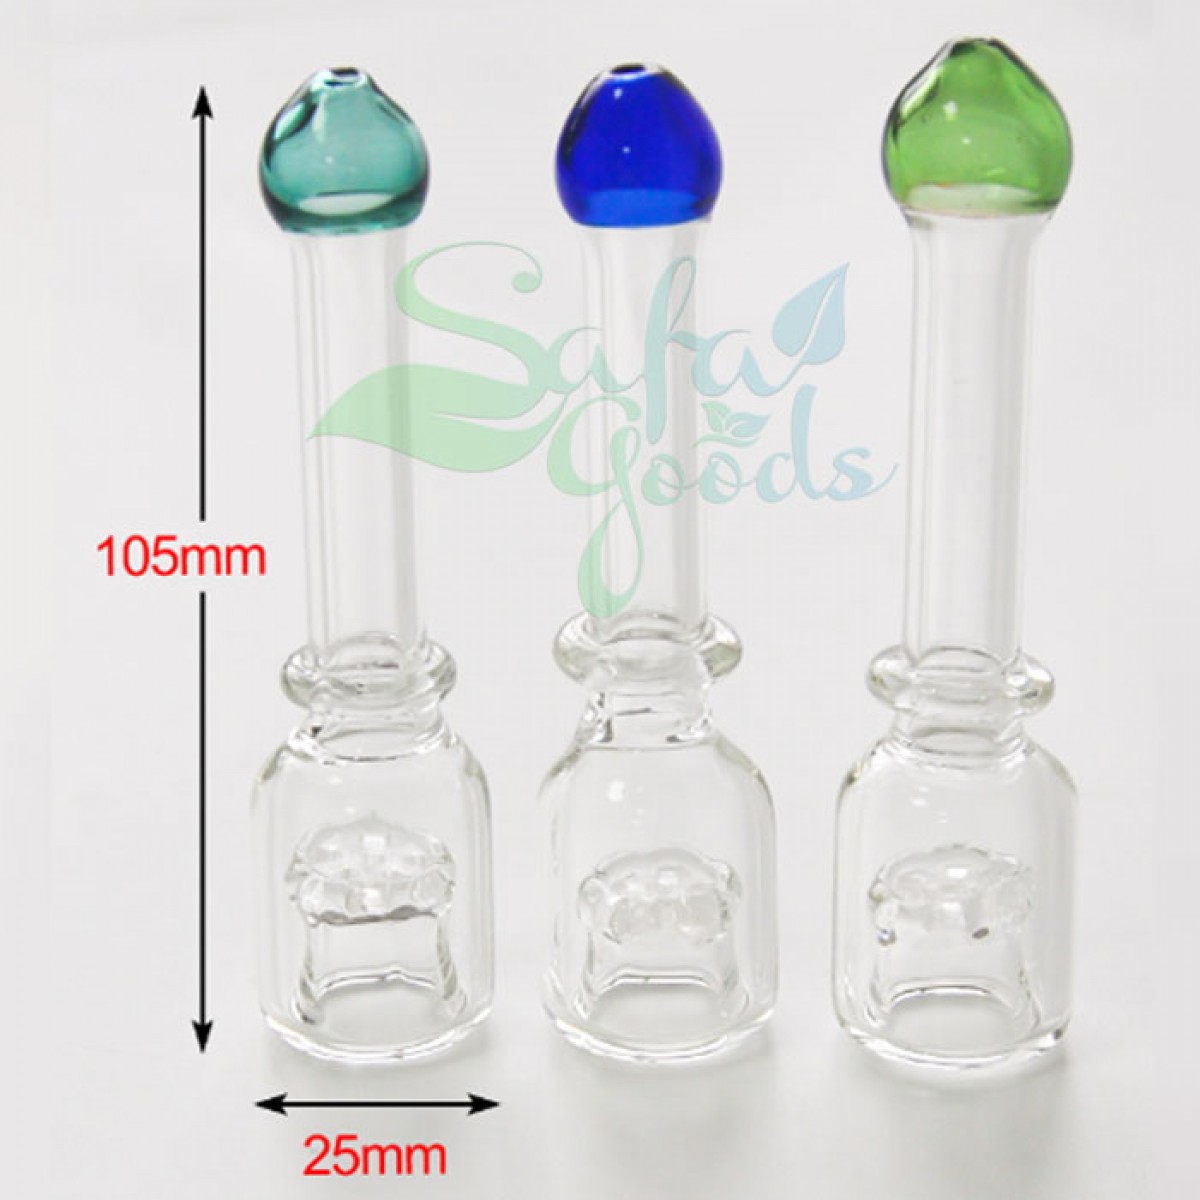 4 Inch Glass Chillum Hand Pipes